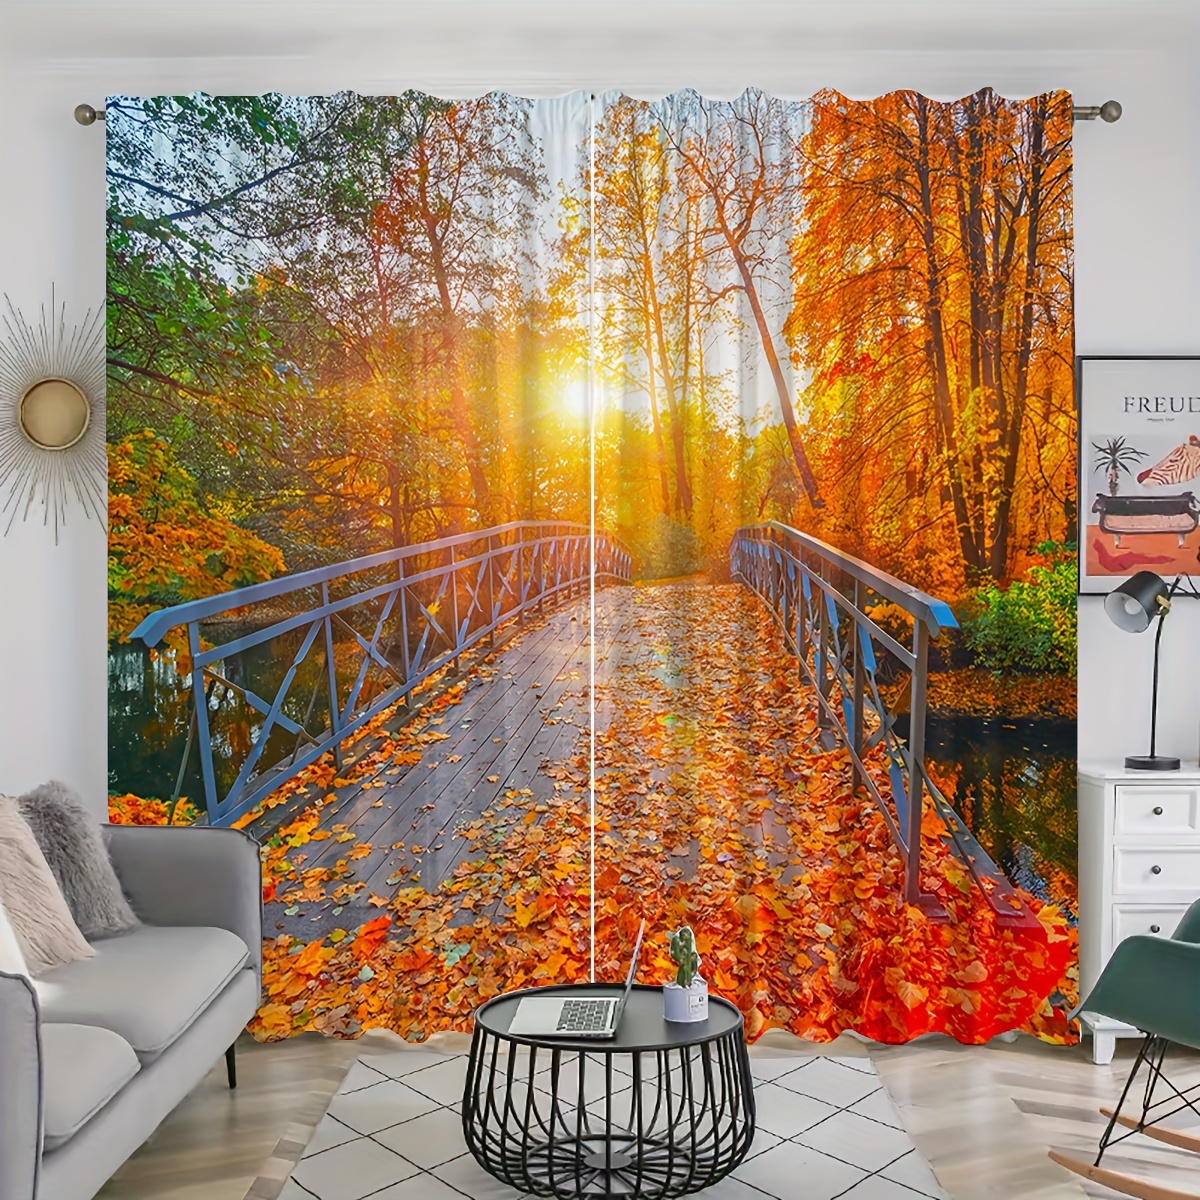 

2-piece Set Autumn Forest Lake Bridge & Golden Pathway Printed Curtains - Rod Pocket Design For Easy Hanging, Perfect For Living Room, Bedroom, Office, And Dining Decor